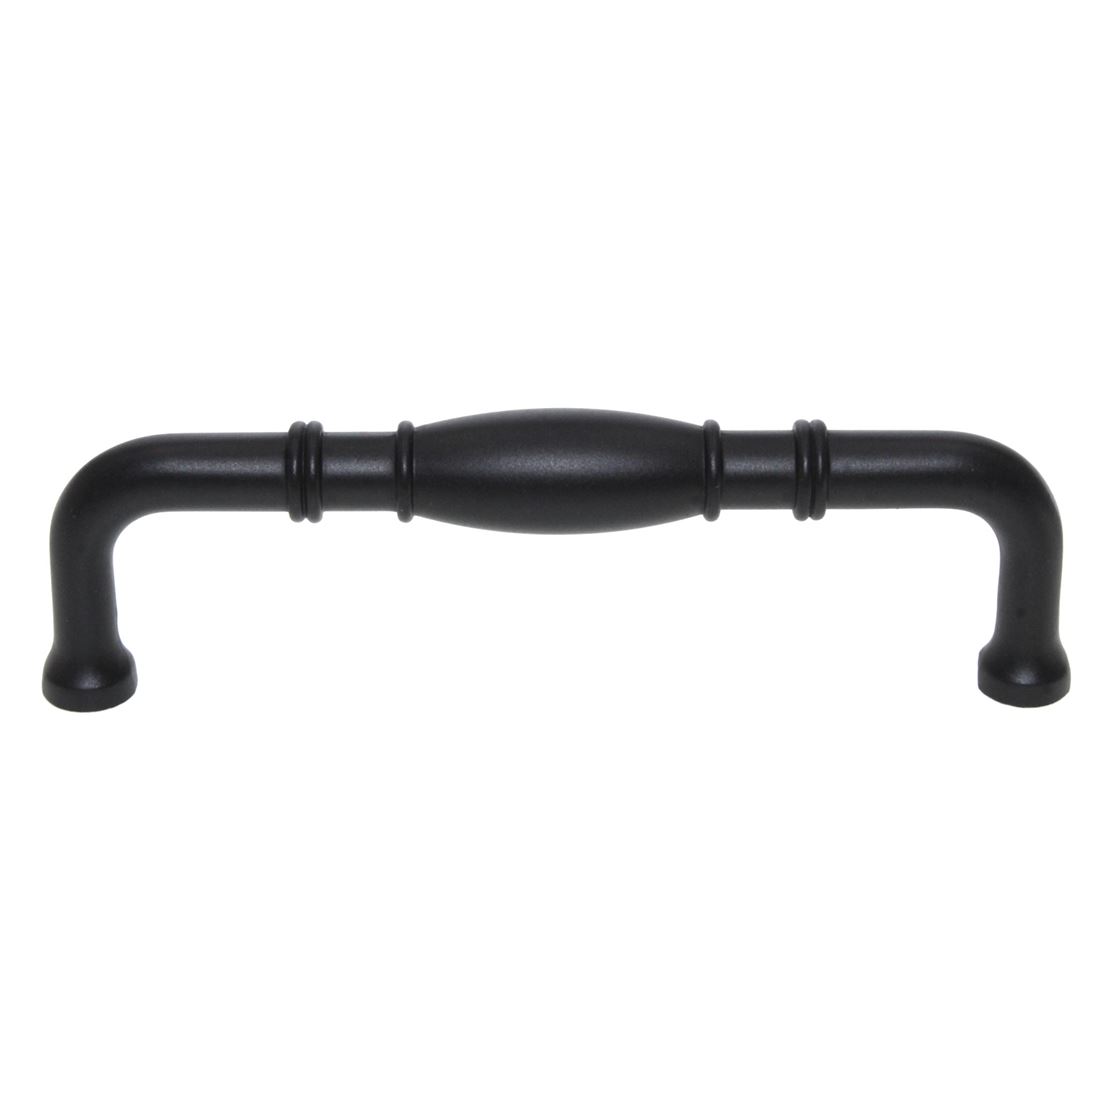 Hickory Hardware Williamsburg 3 3/4" (96mm) Ctr Pull Oil-Rubbed Bronze P3051-10B